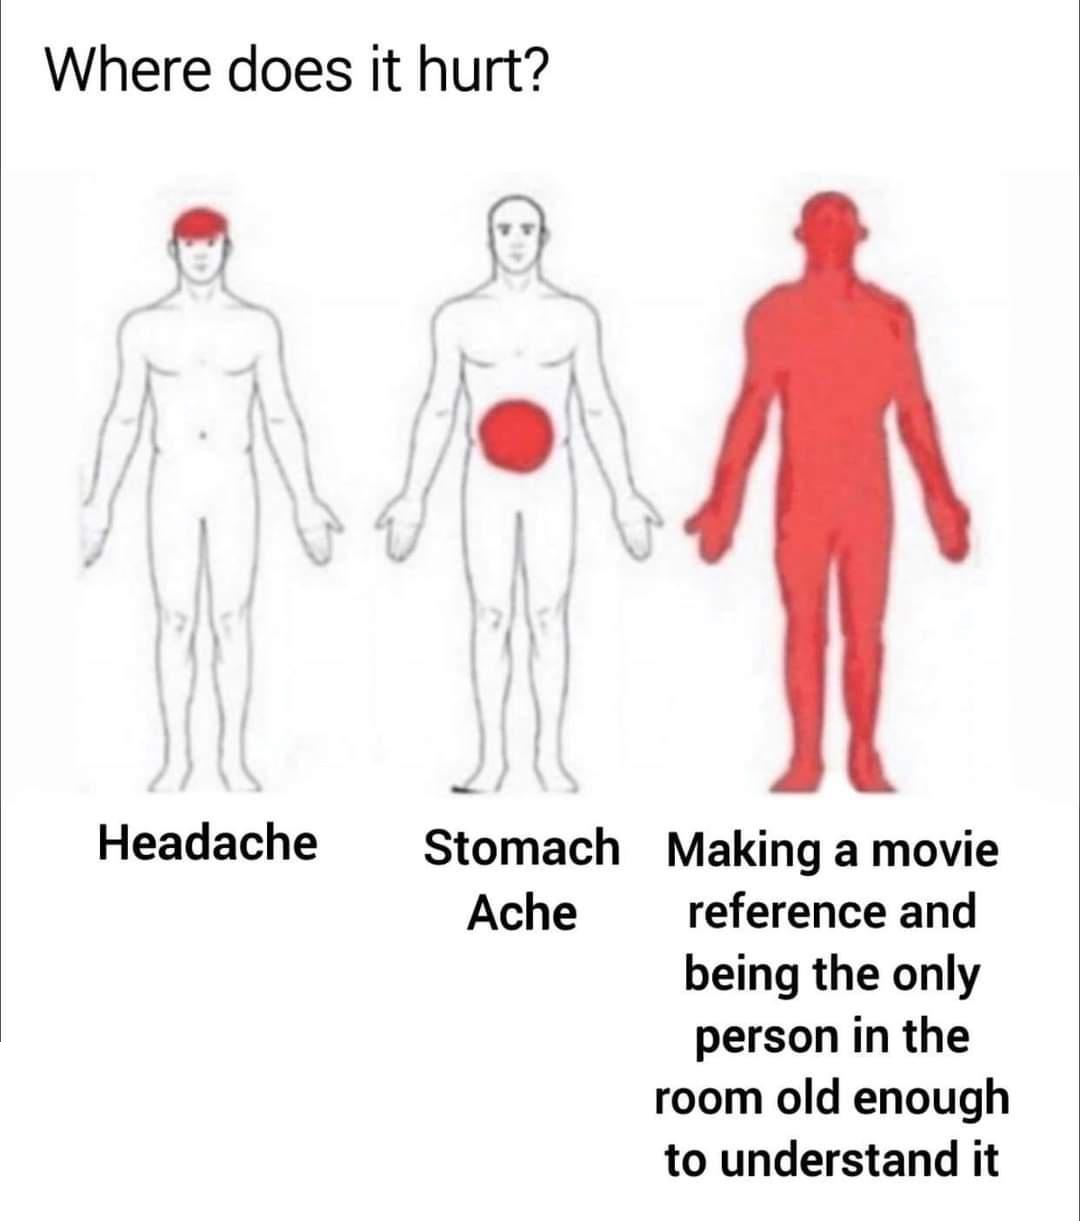 does it hurt meme - Where does it hurt? Headache Stomach Making a movie Ache reference and being the only person in the room old enough to understand it